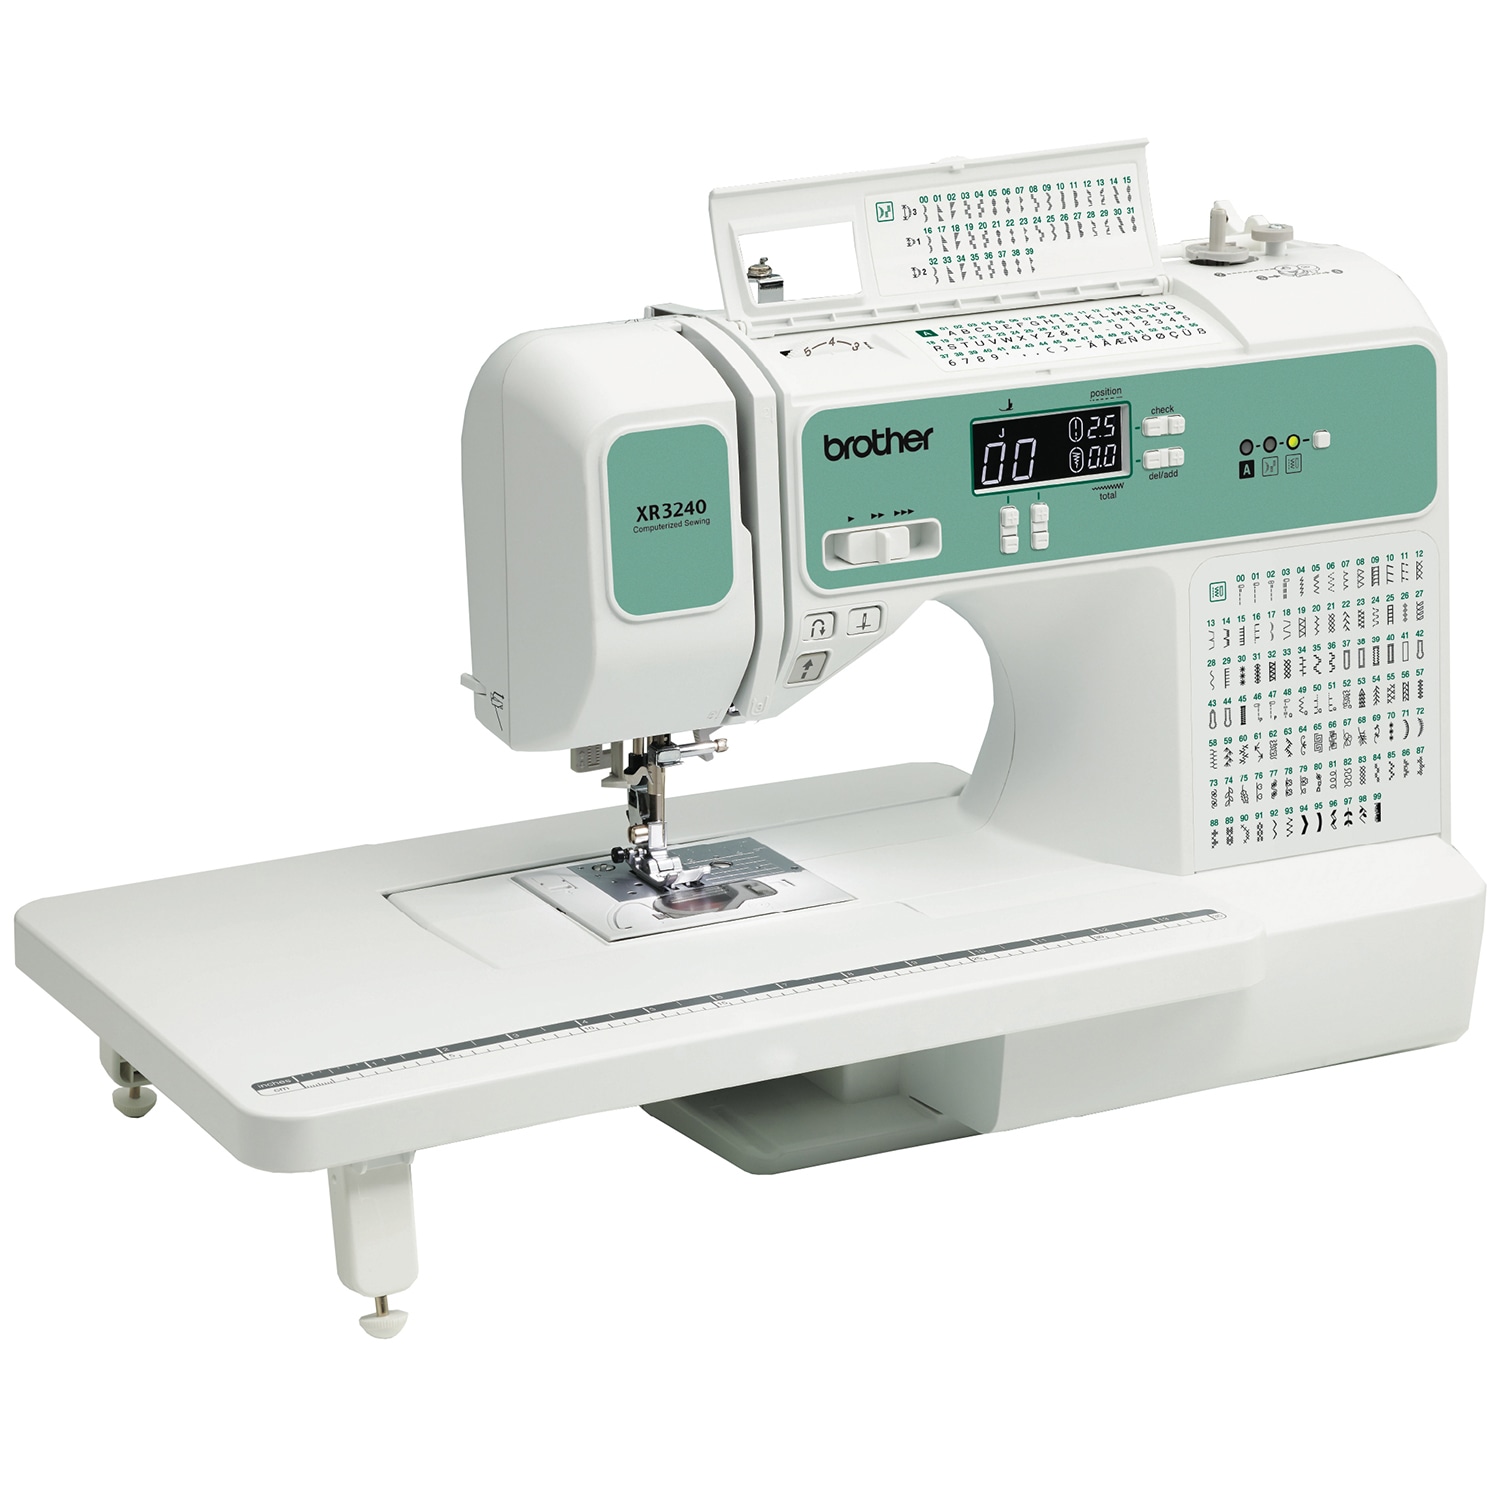 Brother Sewing and Quilting Machine, Computerized, 165 Built-in Stitches,  LCD Display, Wide Table, 8 Included Presser Feet, White